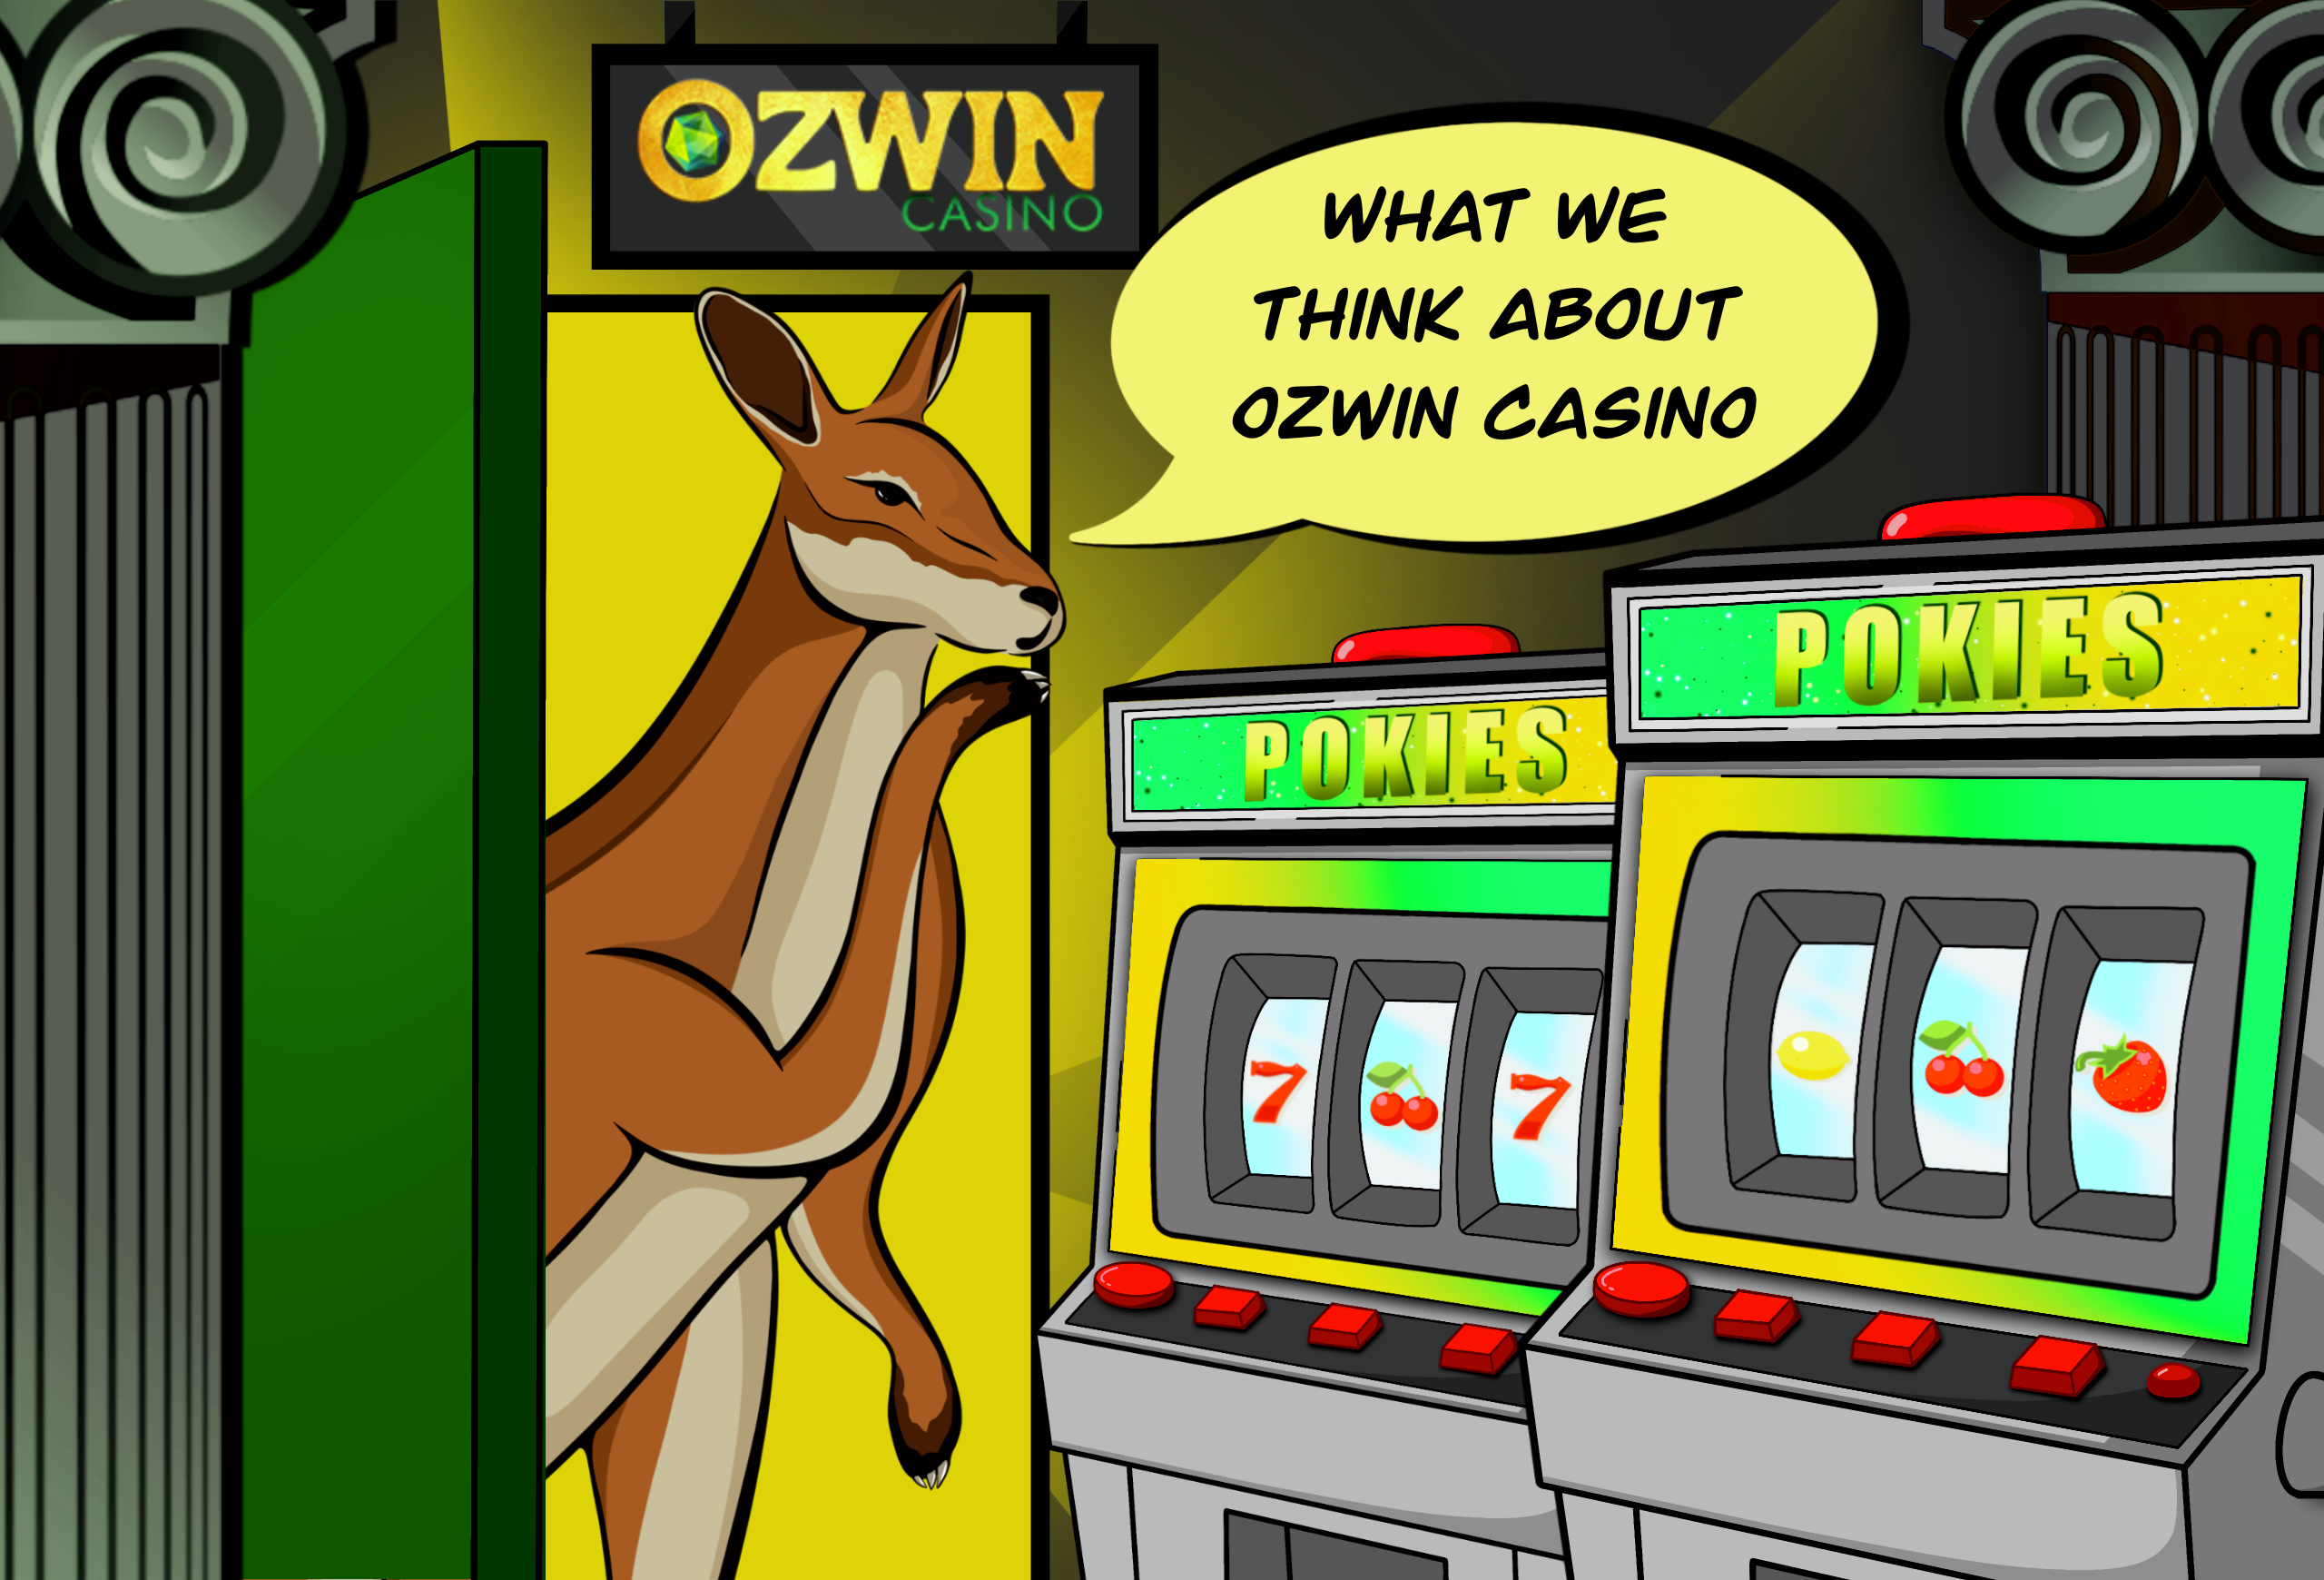 Kangaroo concludes about Ozwin Casino